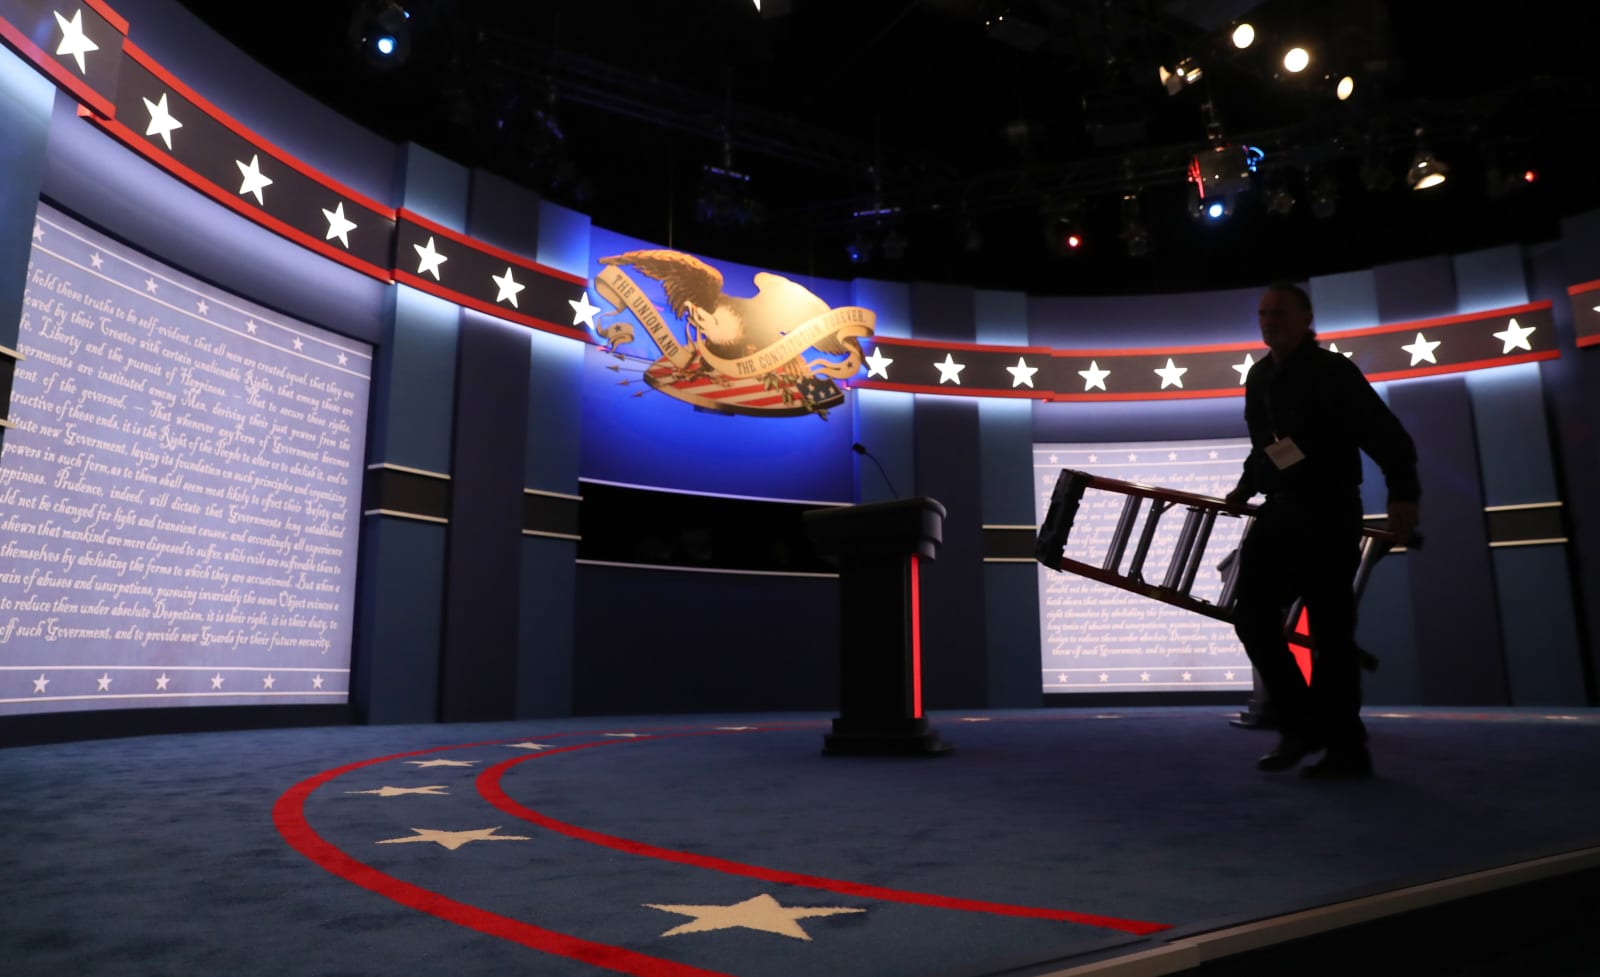 photo of Debate venue offering journalists $200 'bargain' for WiFi image